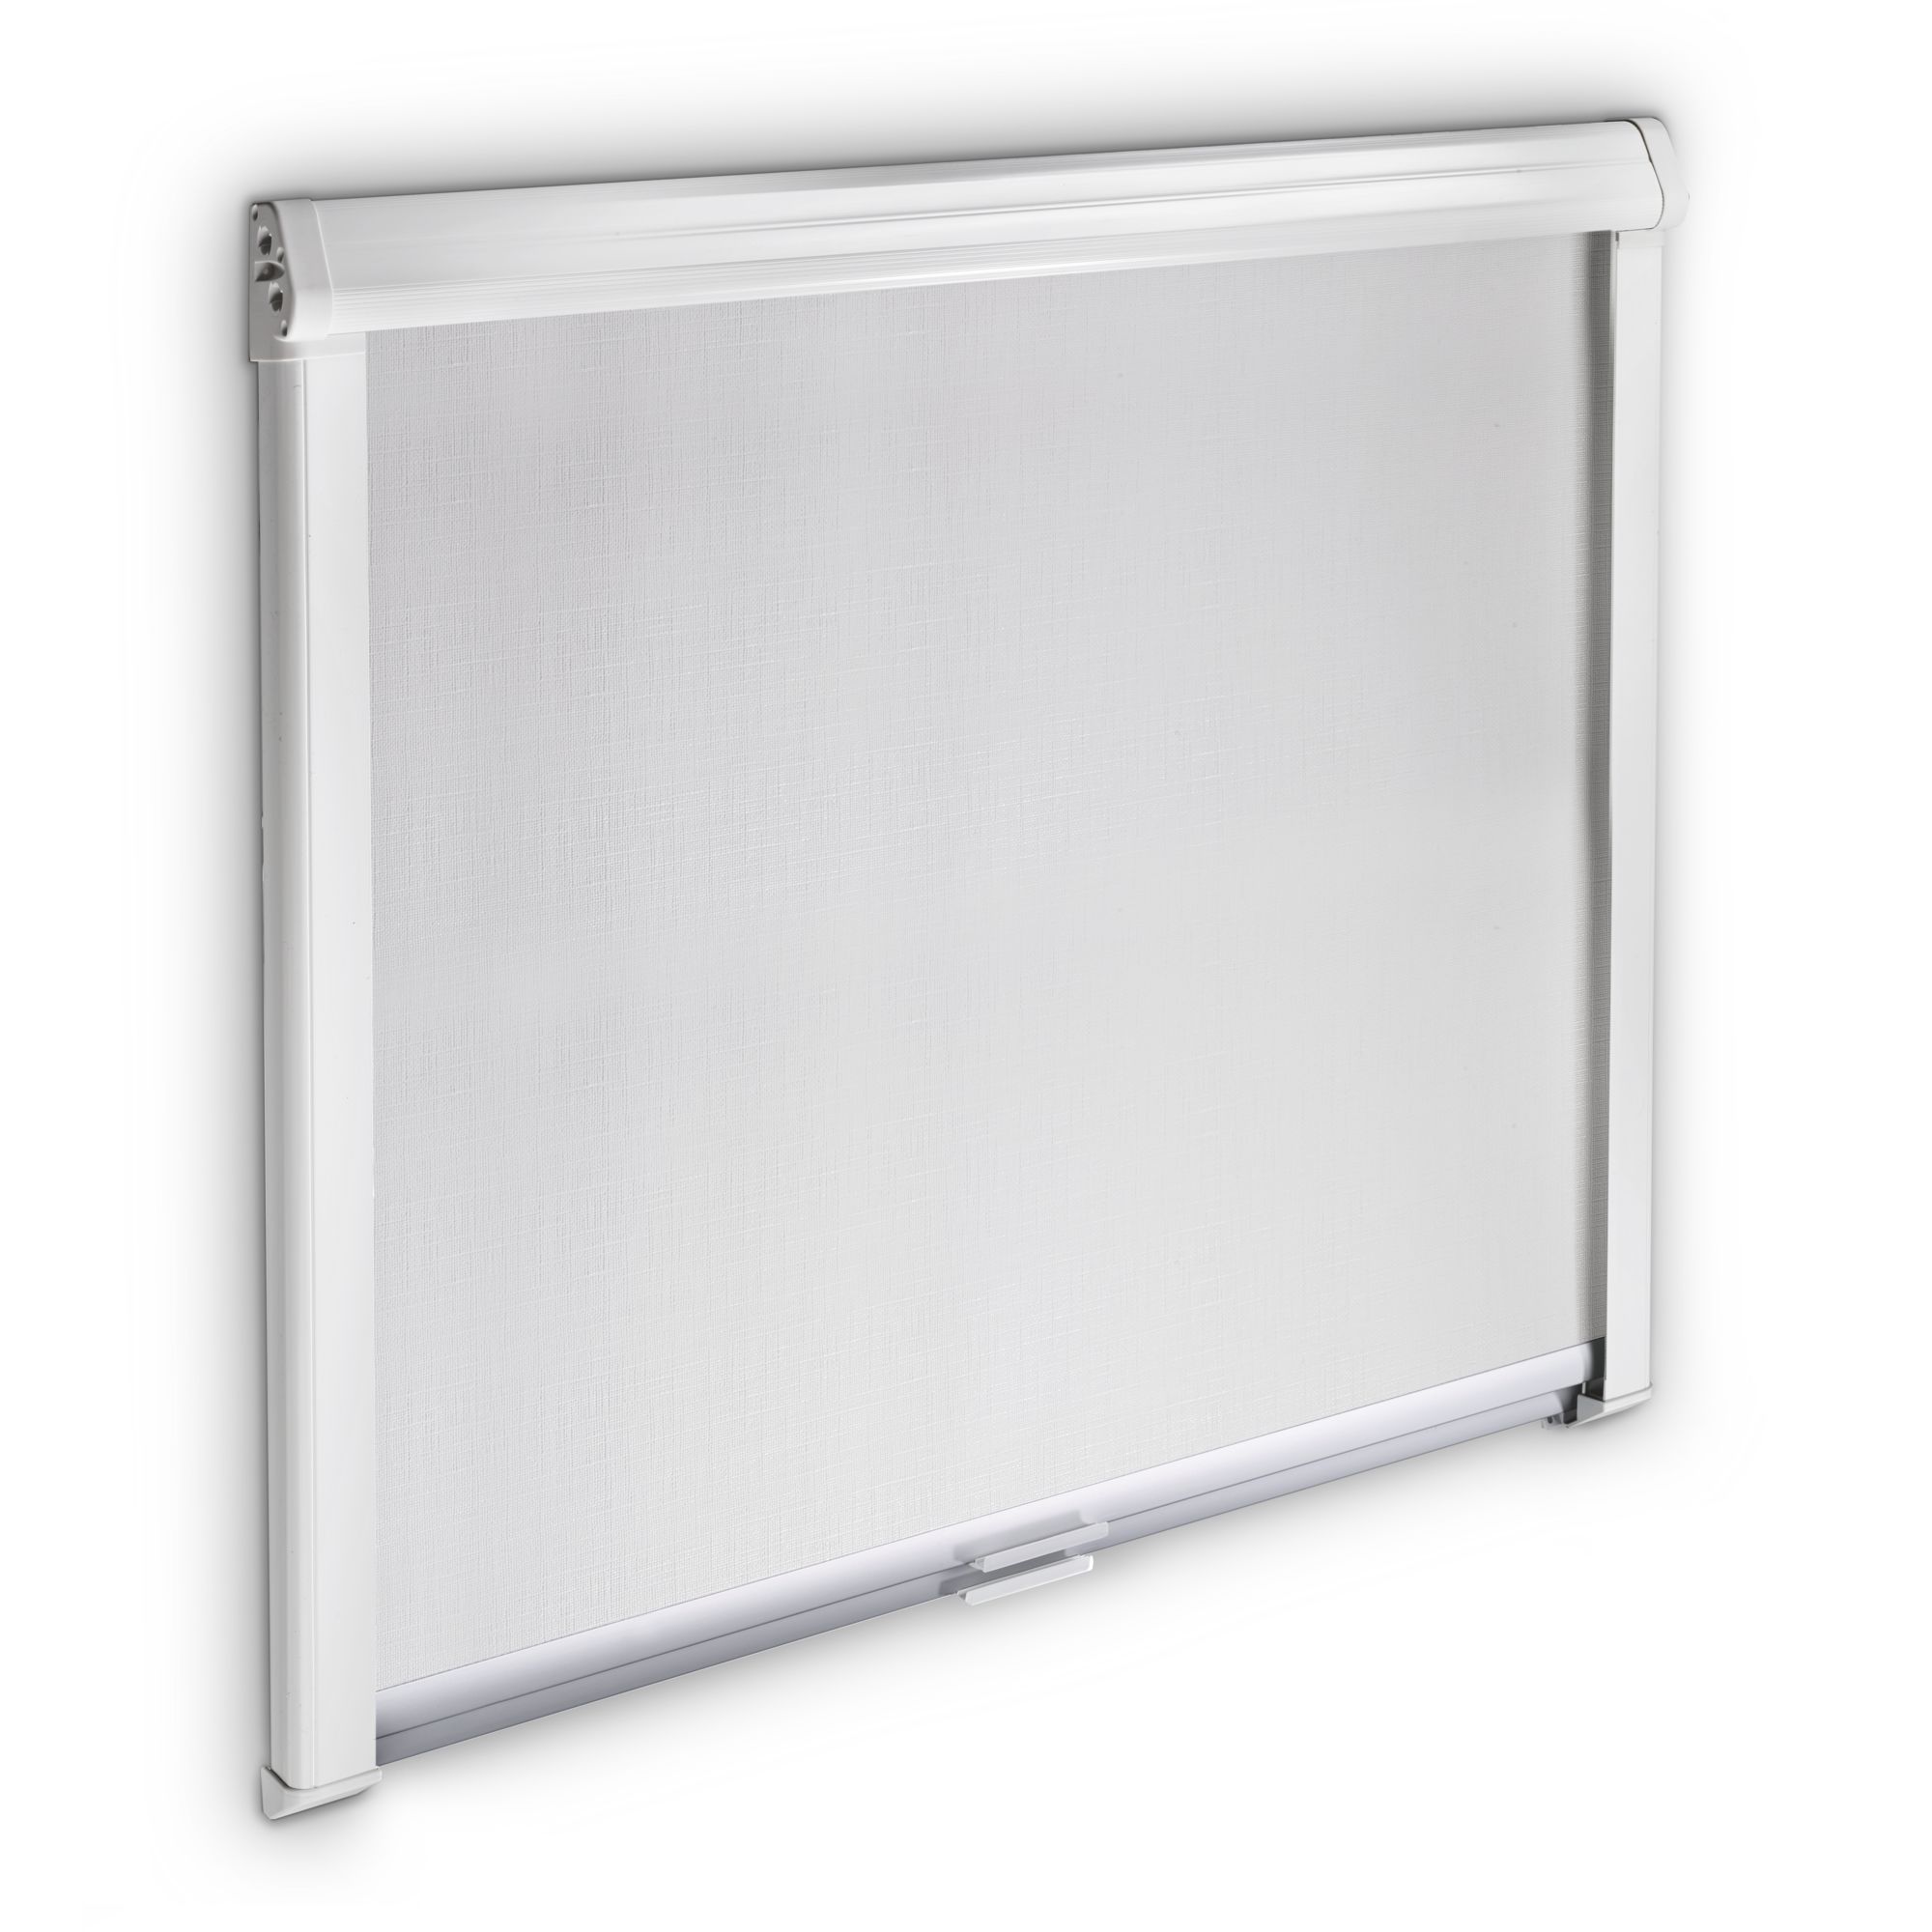 Dometic Black-Out Roller Blind 3000, 810 x 710 mm, grey-white